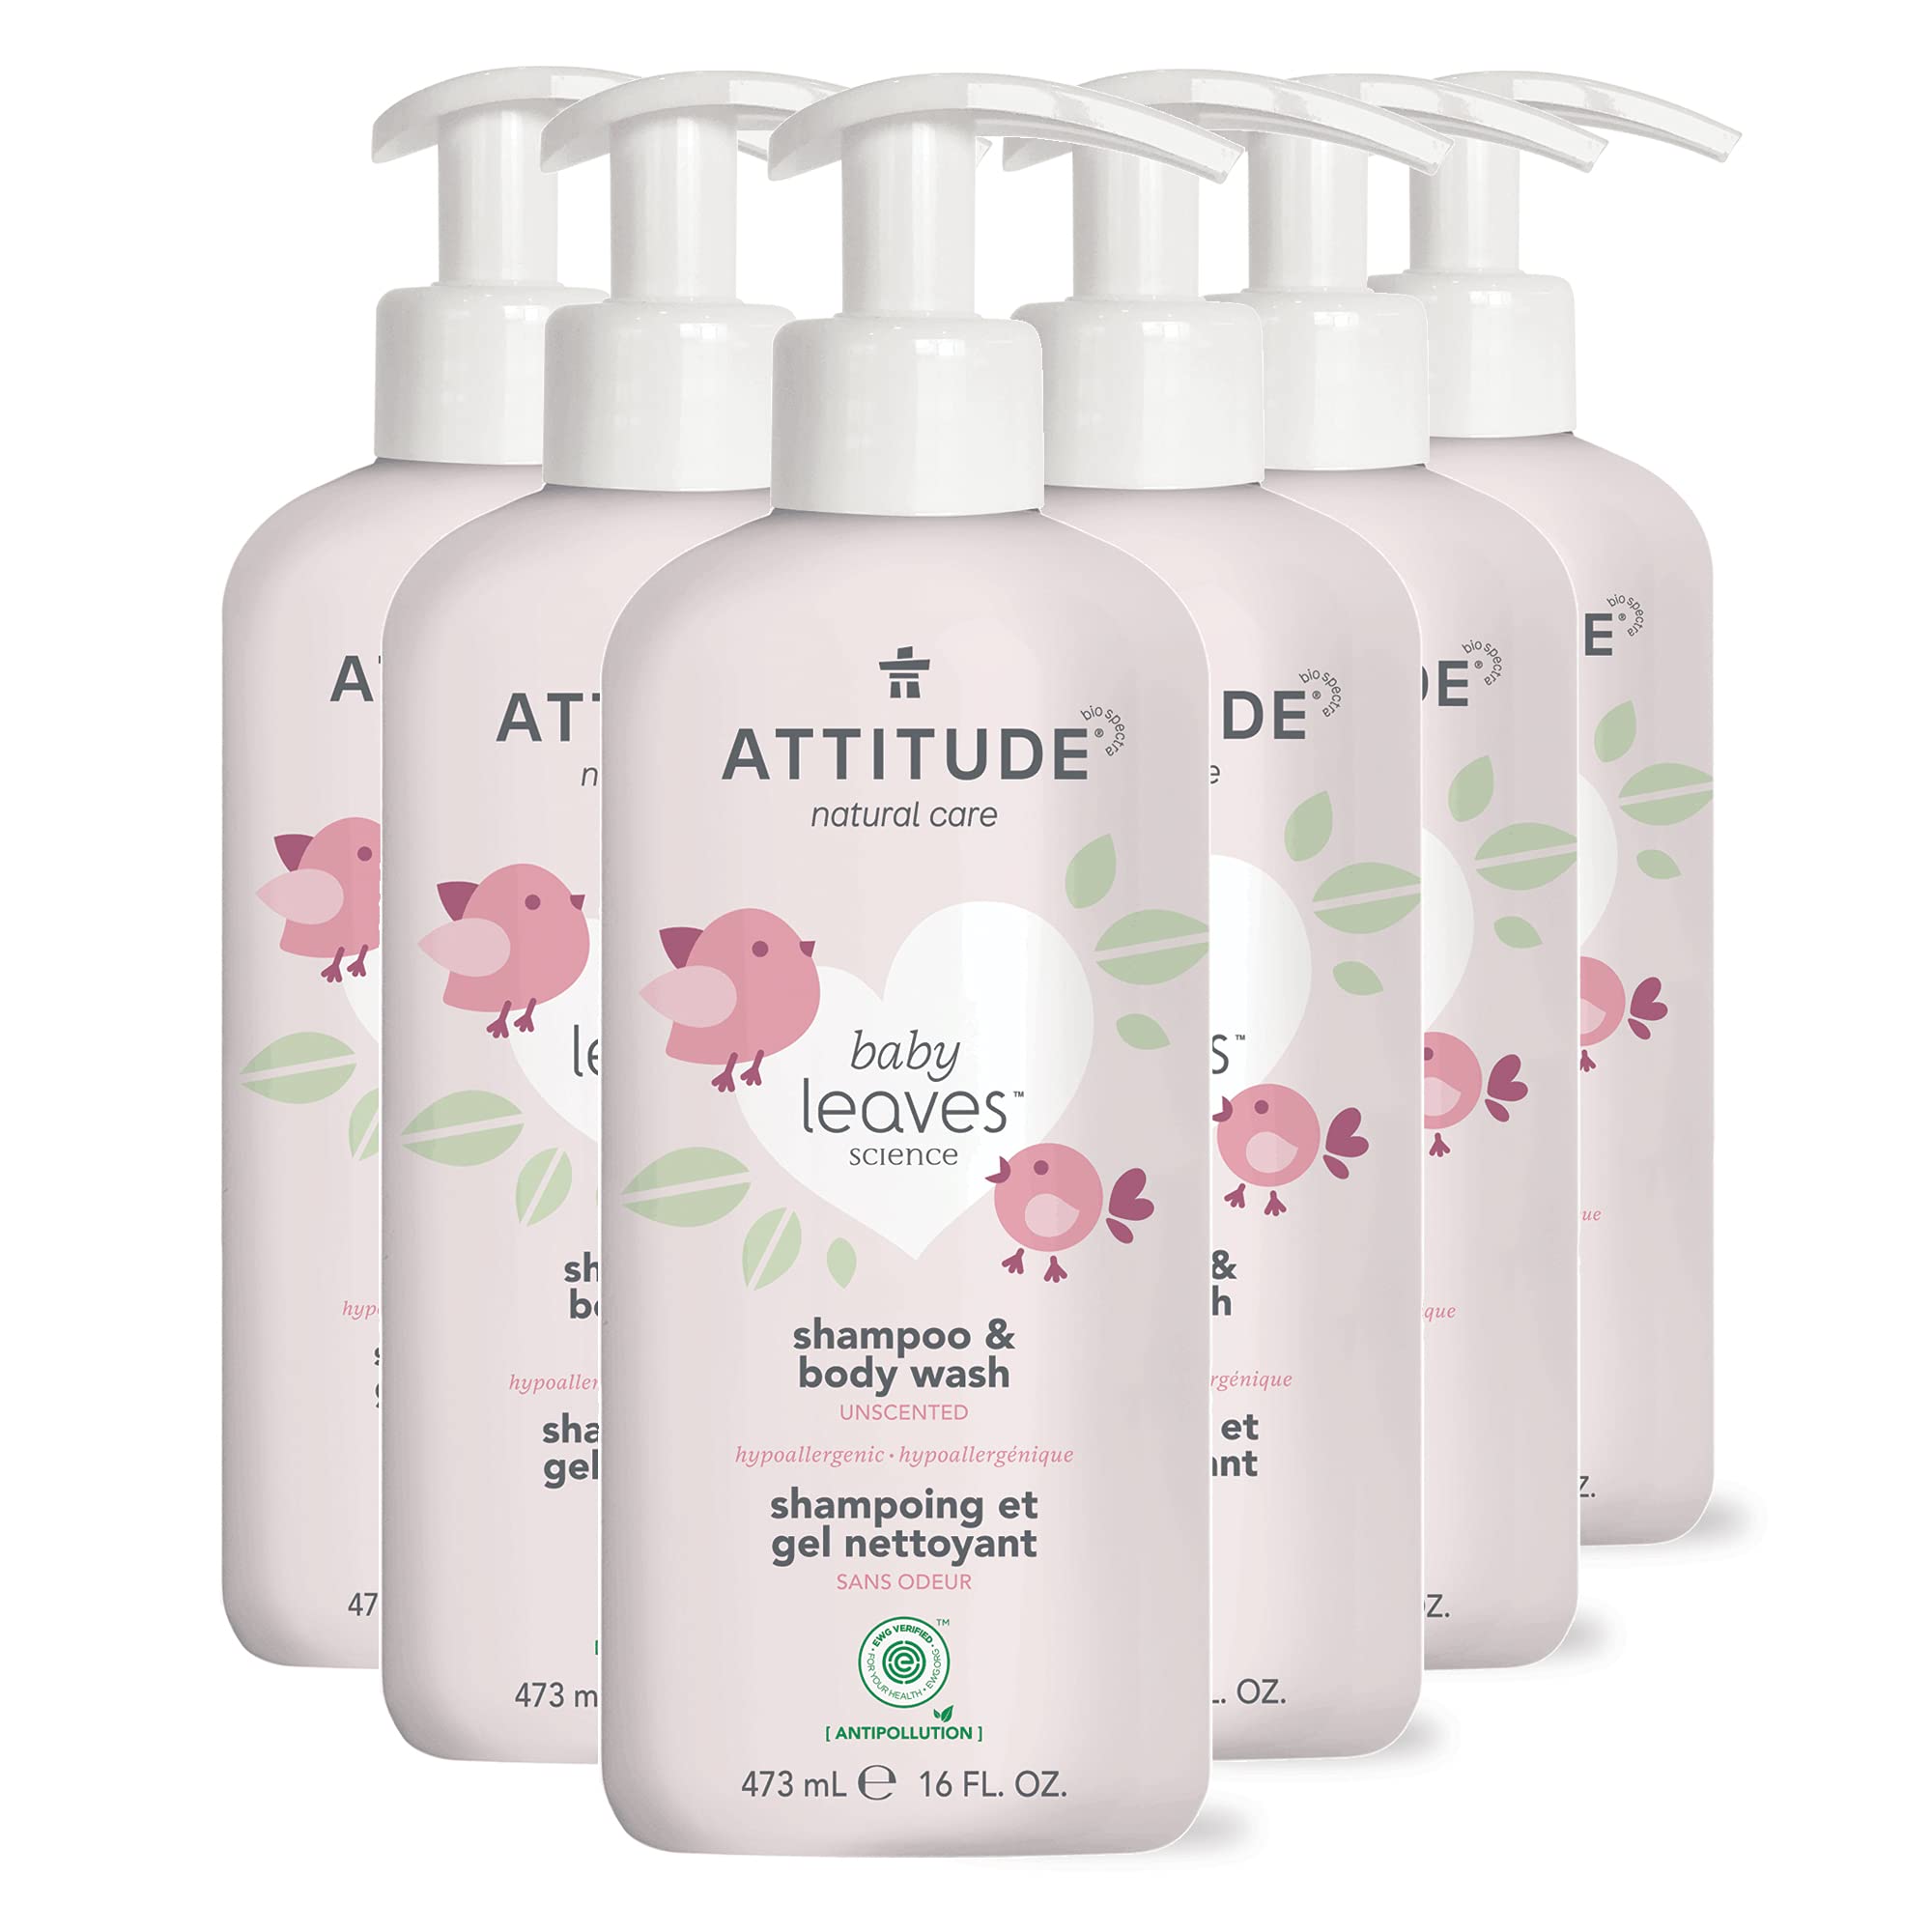 ATTITUDE 2-in-1 Shampoo and Body Wash for baby, EWG Verified, Plant and Mineral-Based Ingredients, Vegan and Cruelty-free Personal Care Products, Unscented, 16 Fl Oz (Pack of 6)